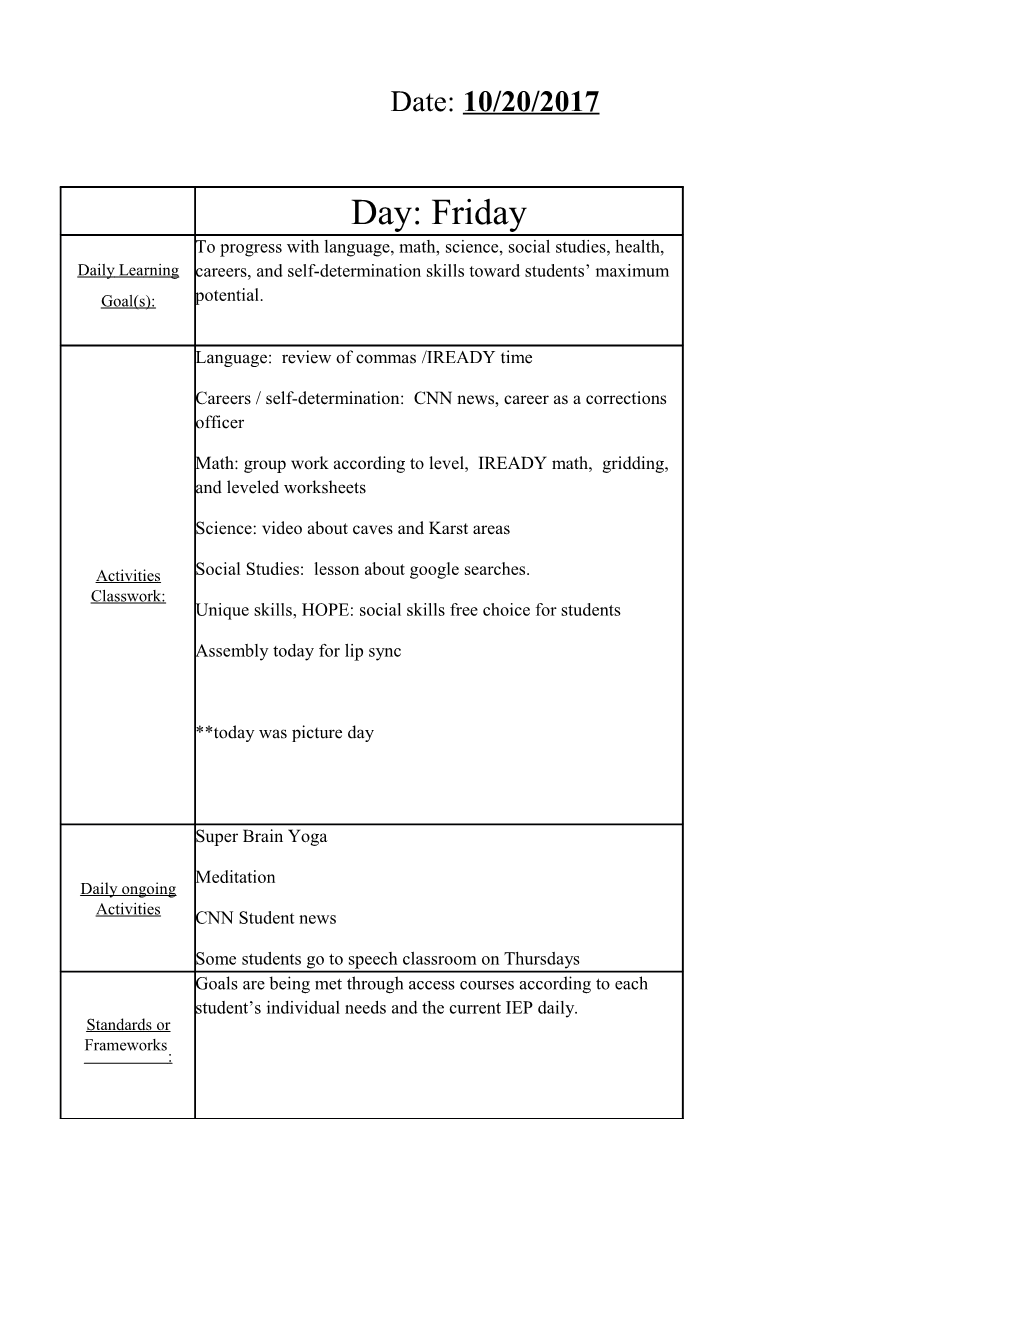 Daily Lesson Plan s3